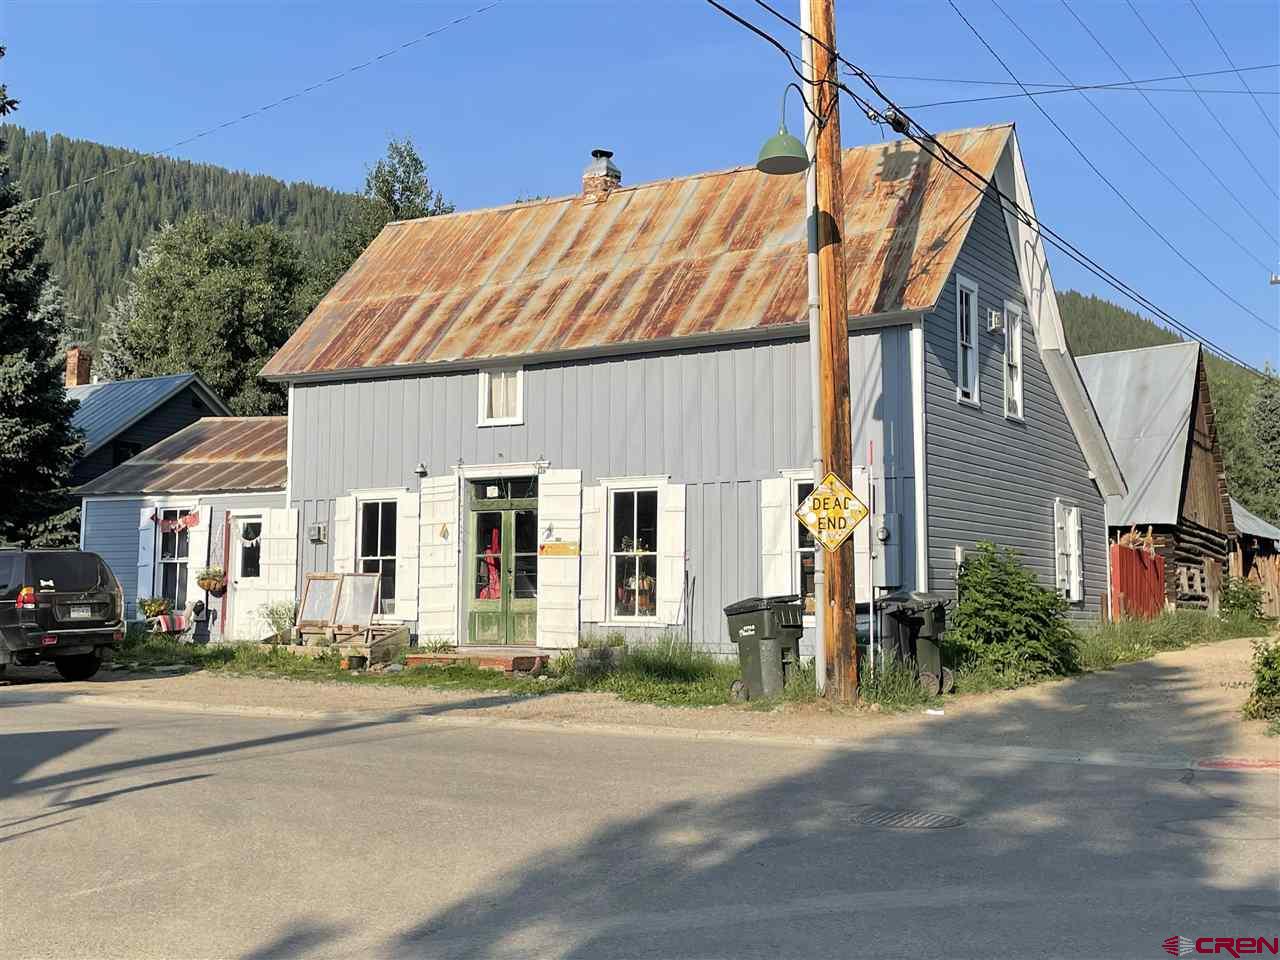 413 Second Street, Crested Butte, CO 81224